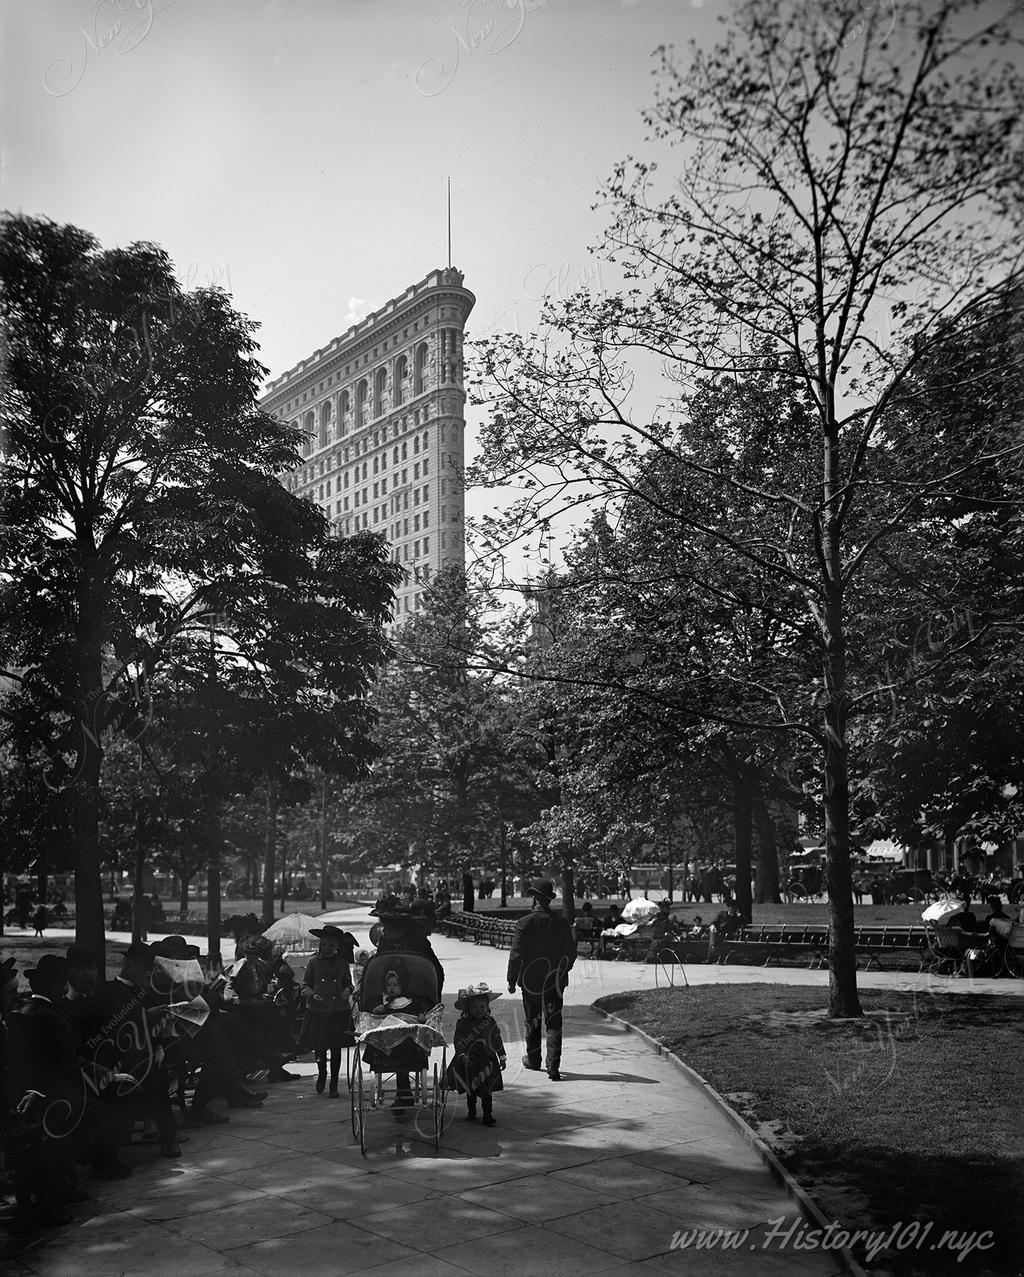 Families stroll through Madison Square Park, its trees framing the recently completed Flatiron Building.